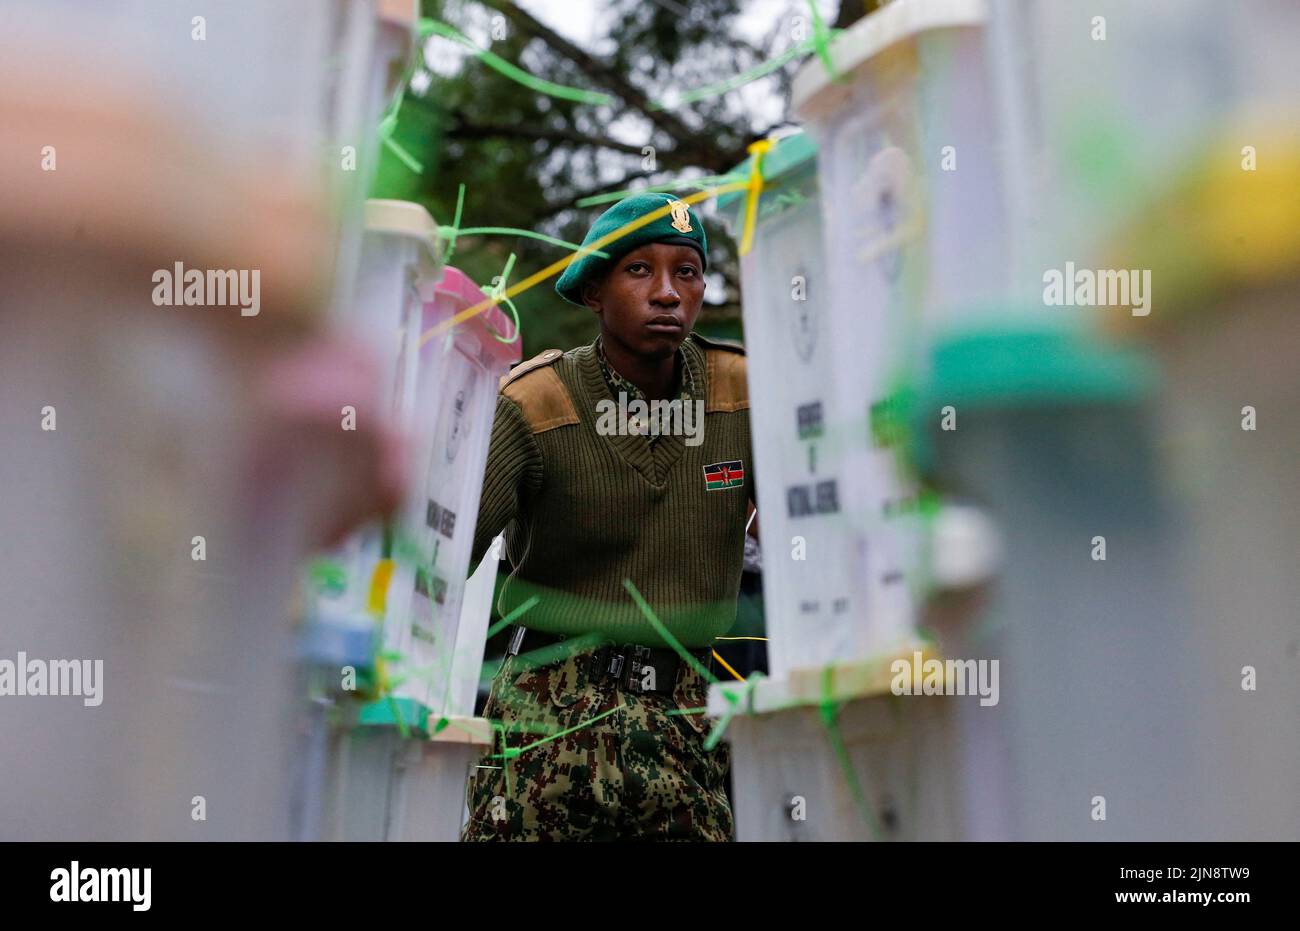 A National Youth Service (NYS) officer stands guard near sealed ballot boxes containing electoral materials at an Independent Electoral and Boundaries Commission (IEBC) tallying centre after the general election in Nairobi, Kenya August 10, 2022. REUTERS/Thomas Mukoya     TPX IMAGES OF THE DAY Stock Photo